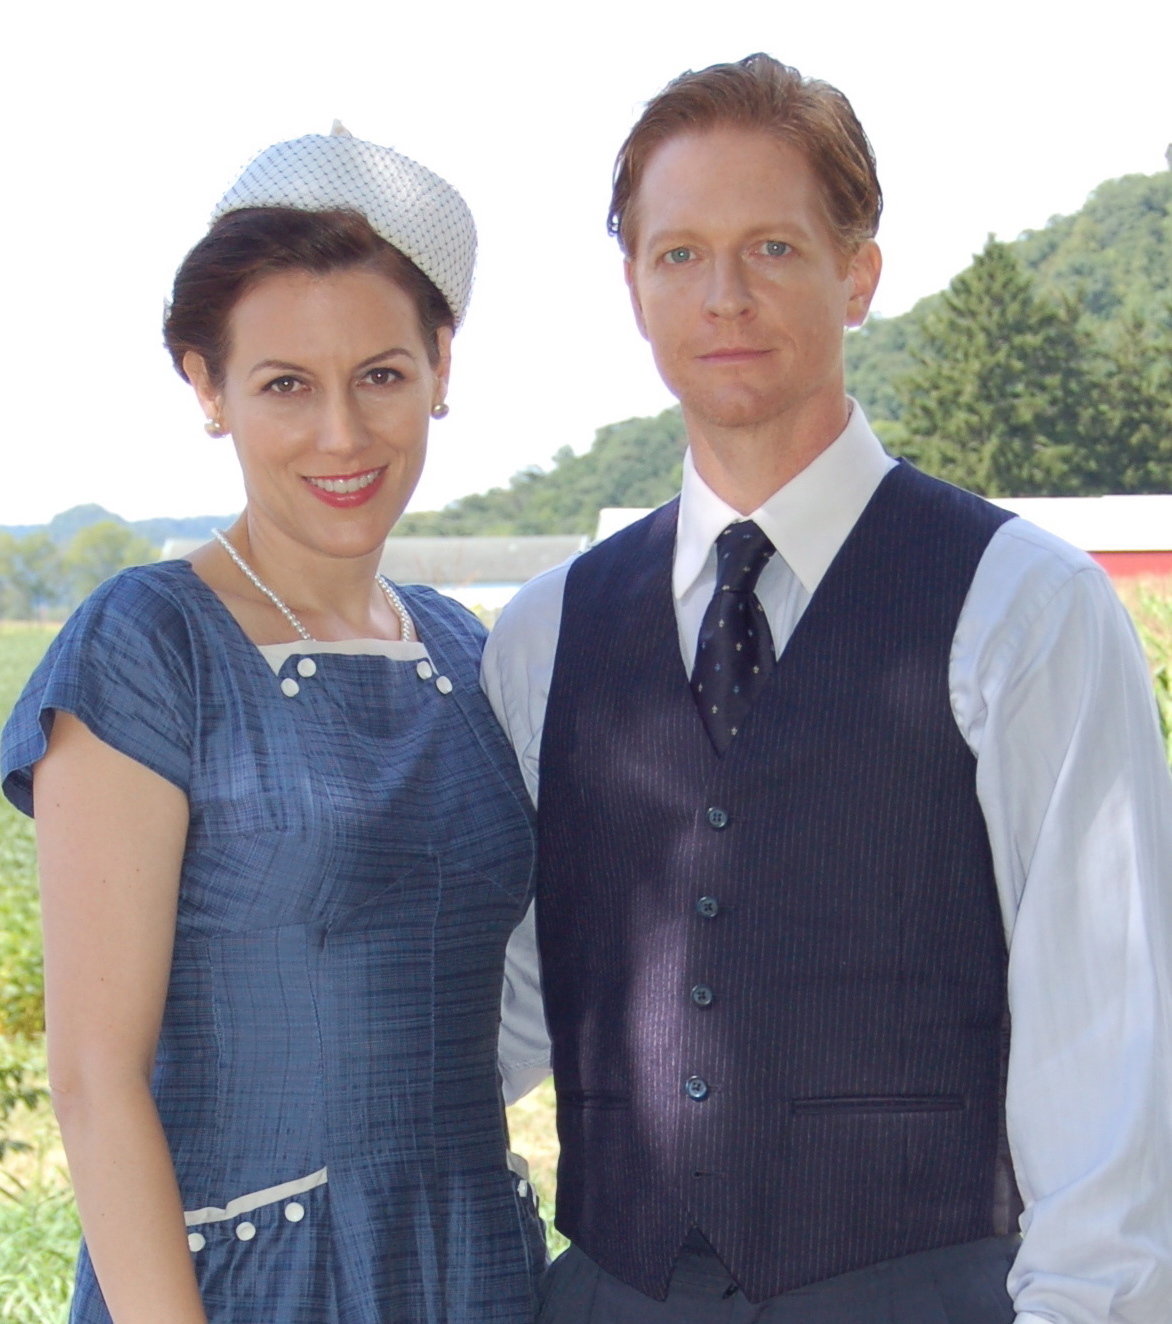 Still of Eric Stoltz and Kate Connor in Fort McCoy